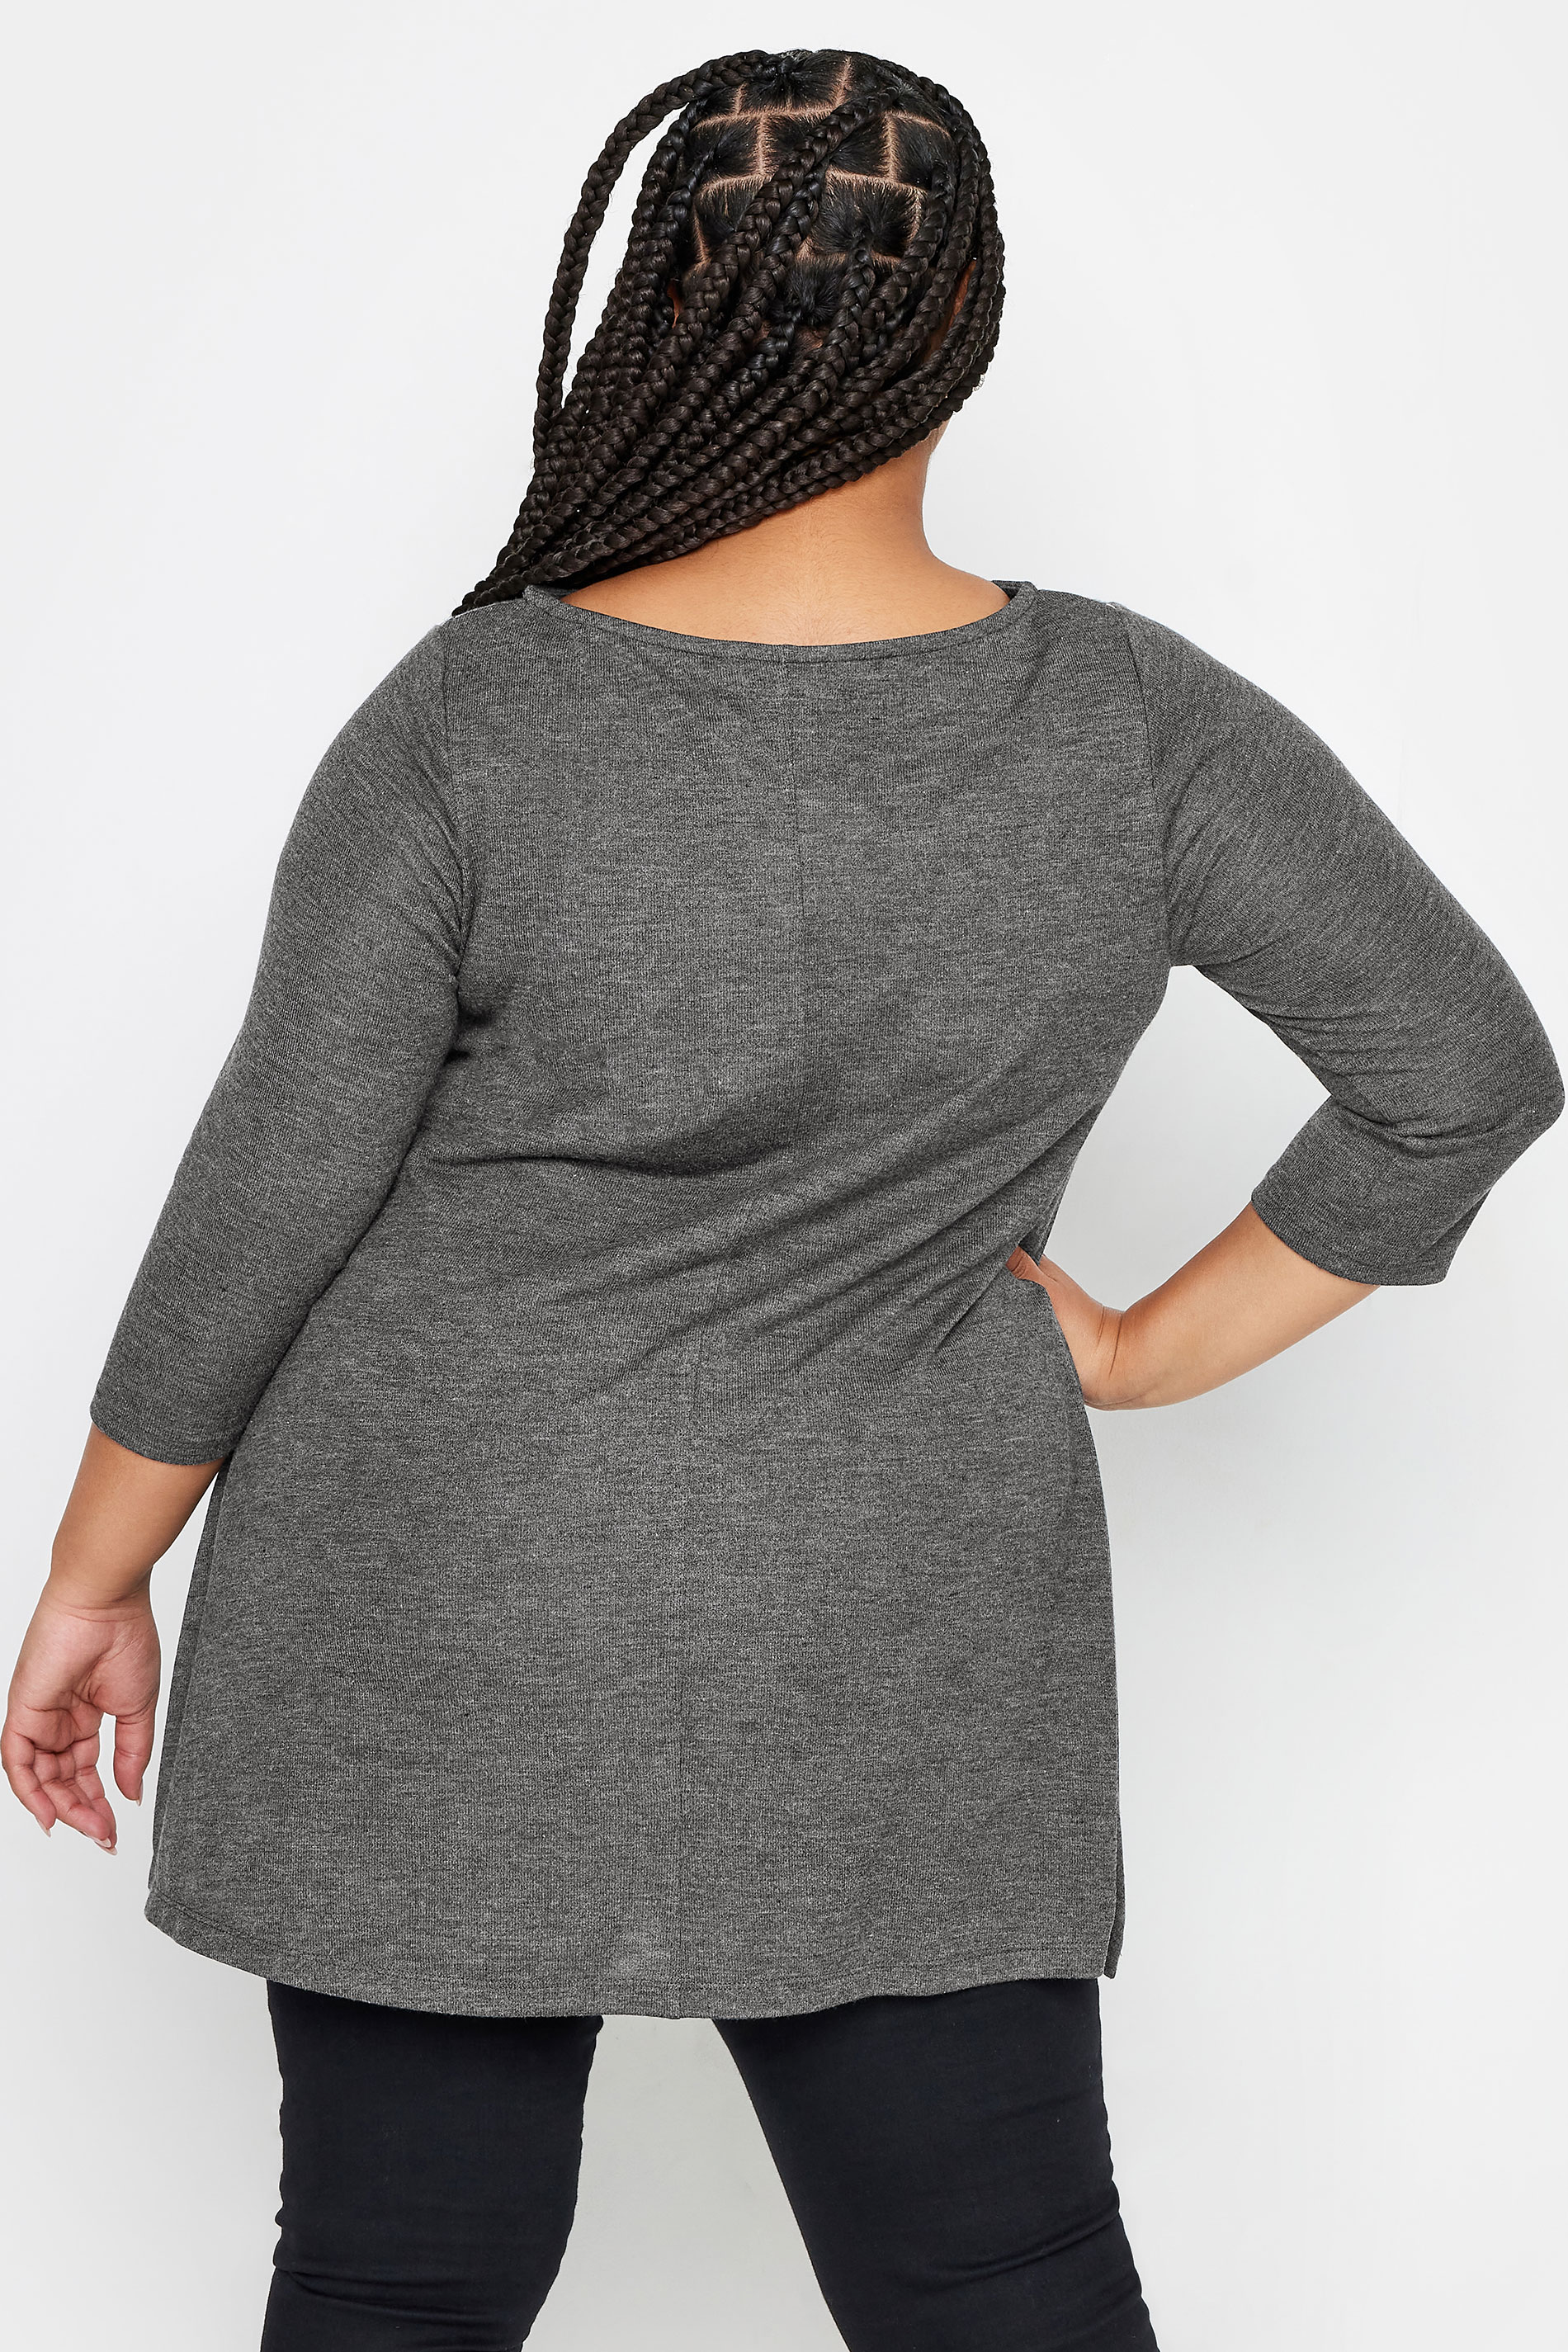 YOURS Plus Size Grey Foil Leopard Print Top | Yours Clothing 3